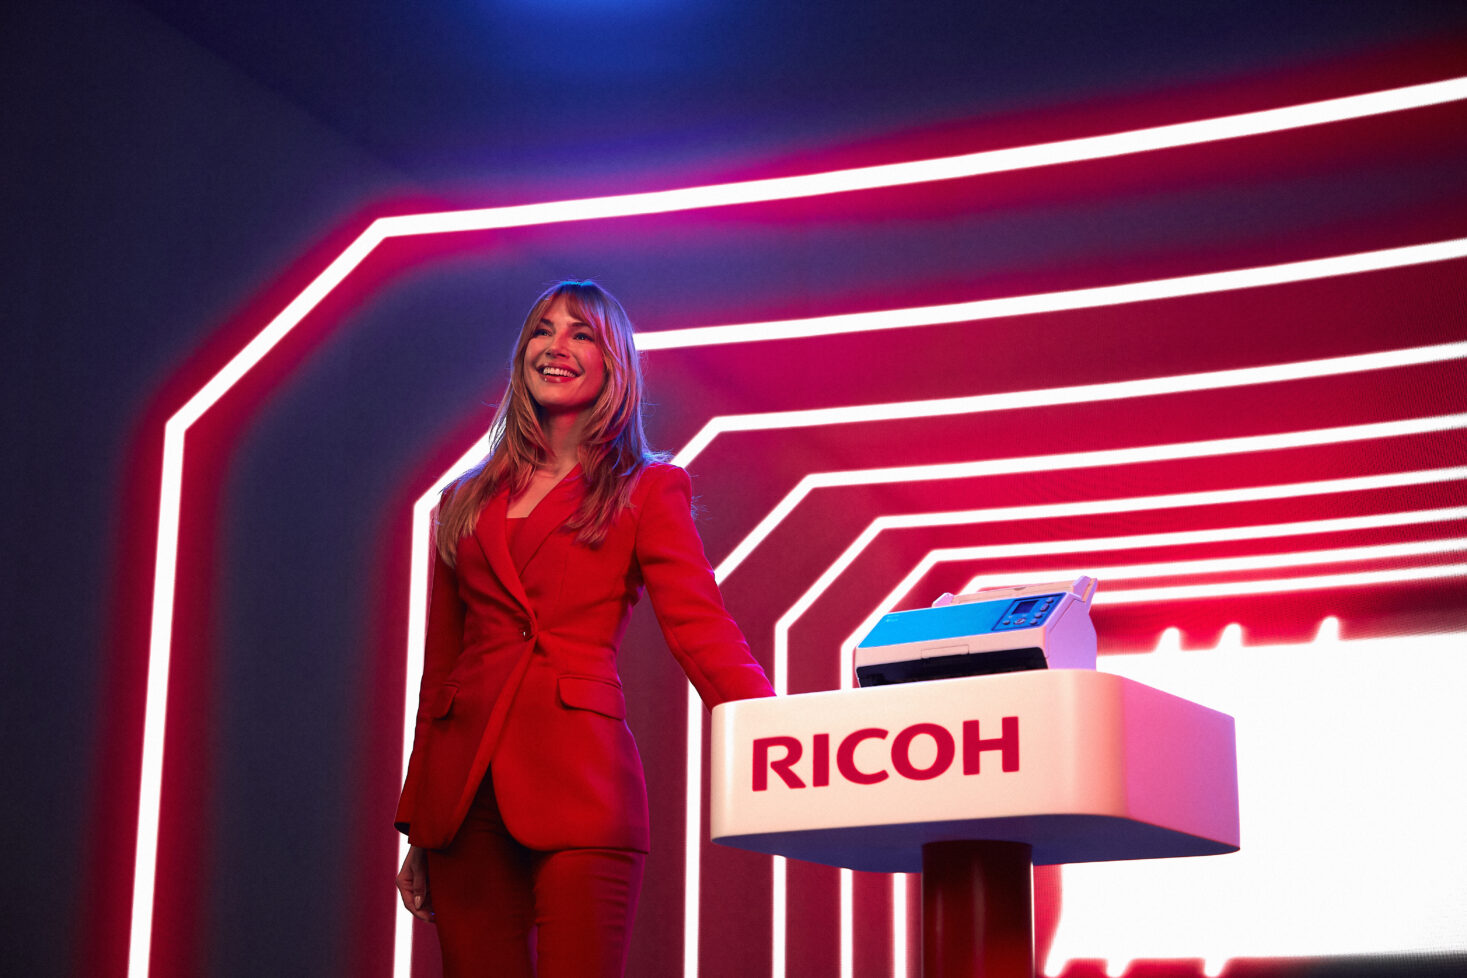 Smiling presenter in a red suit standing at a RICOH branded podium with neon lighting in the background